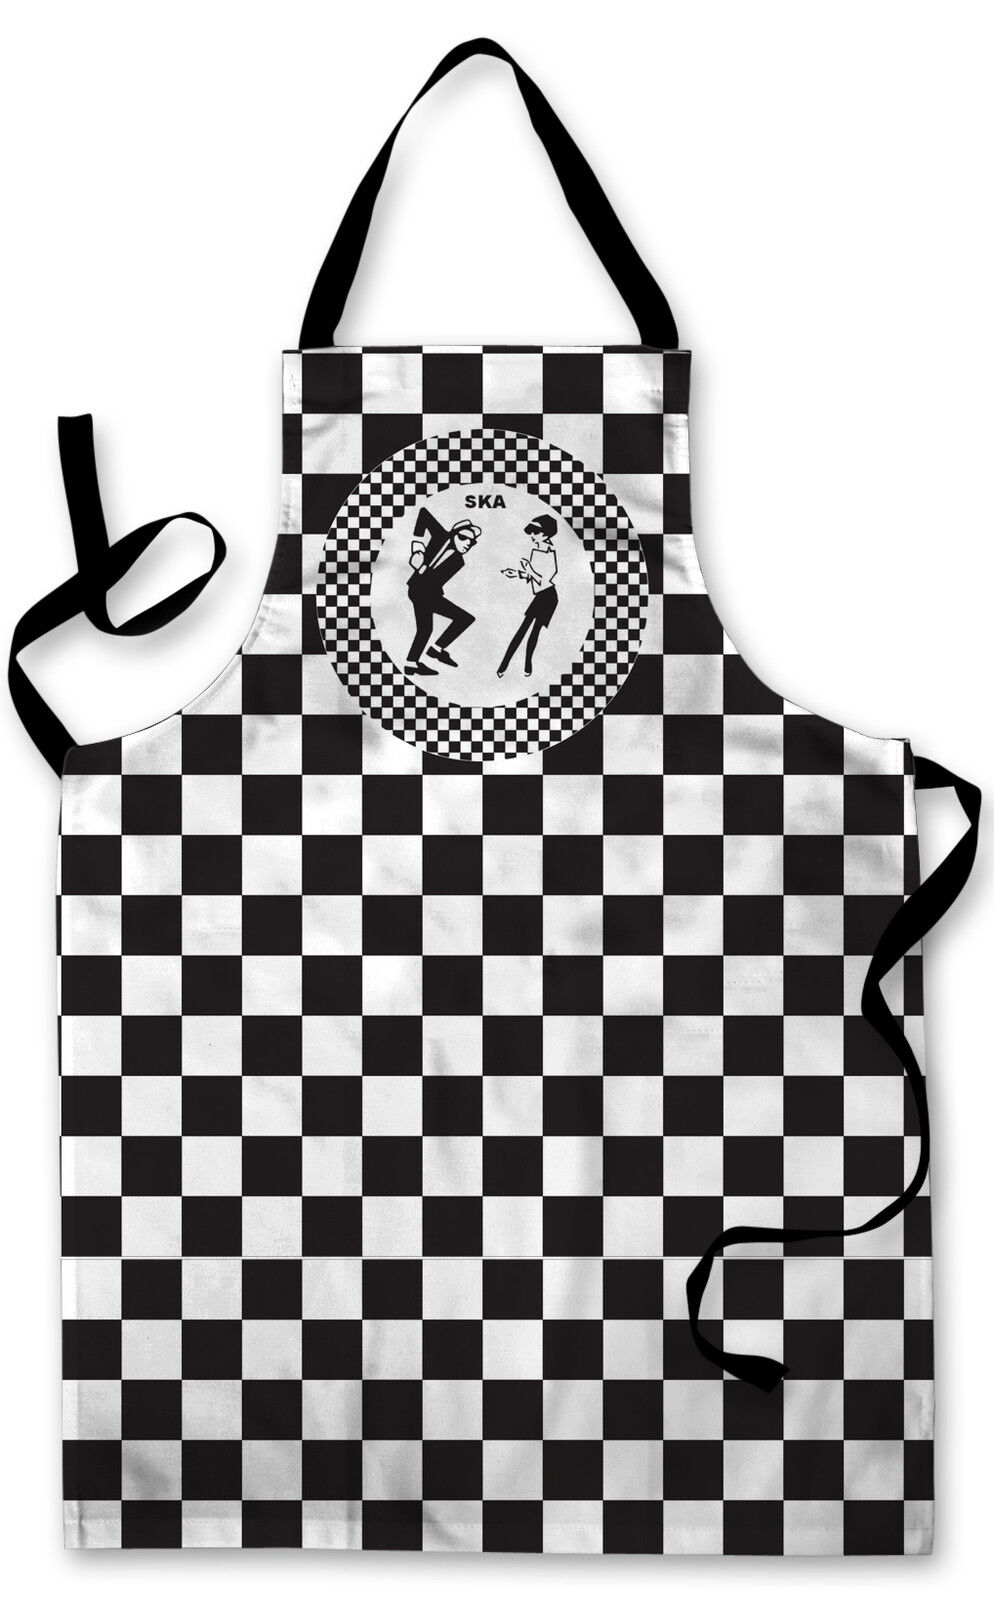 Splashproof Novelty Apron BW Chequered Ska Cooking Painting Kitchen BBQ Gift